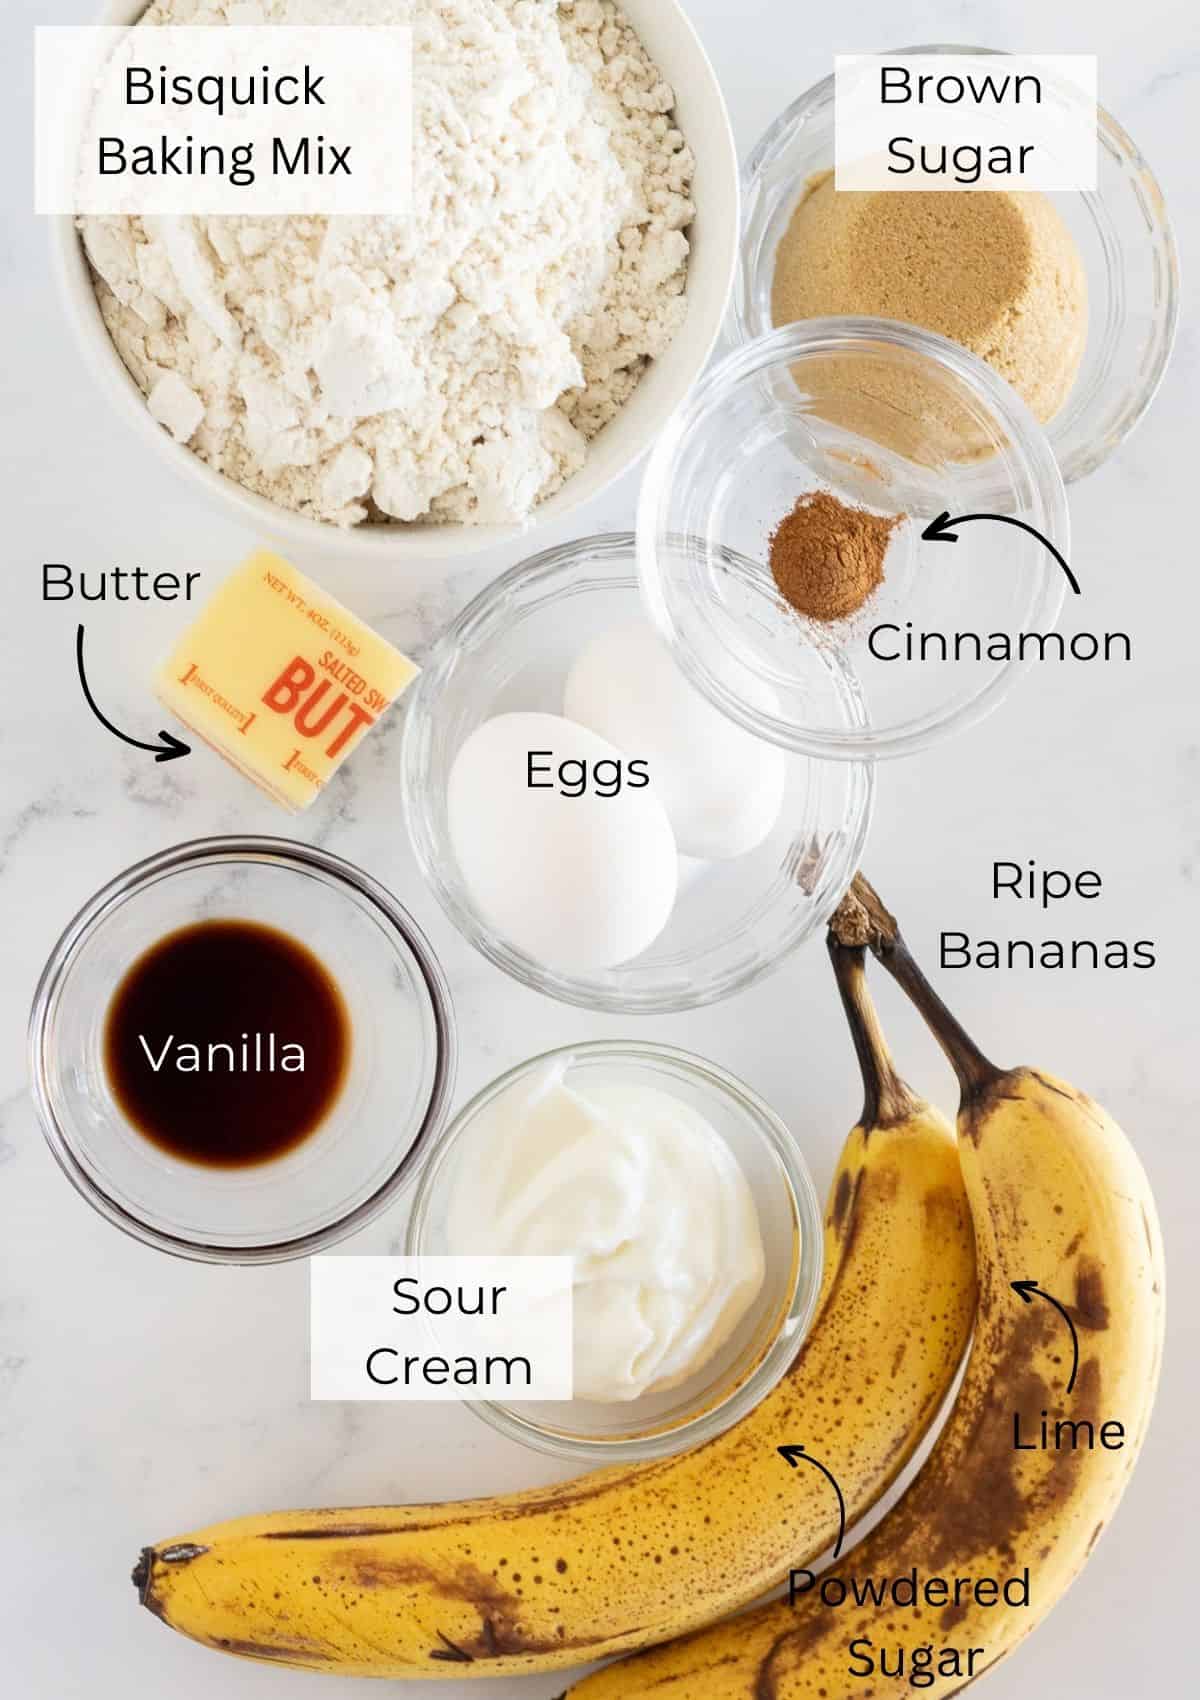 The ingredients needed to make banana muffins with bisquick.